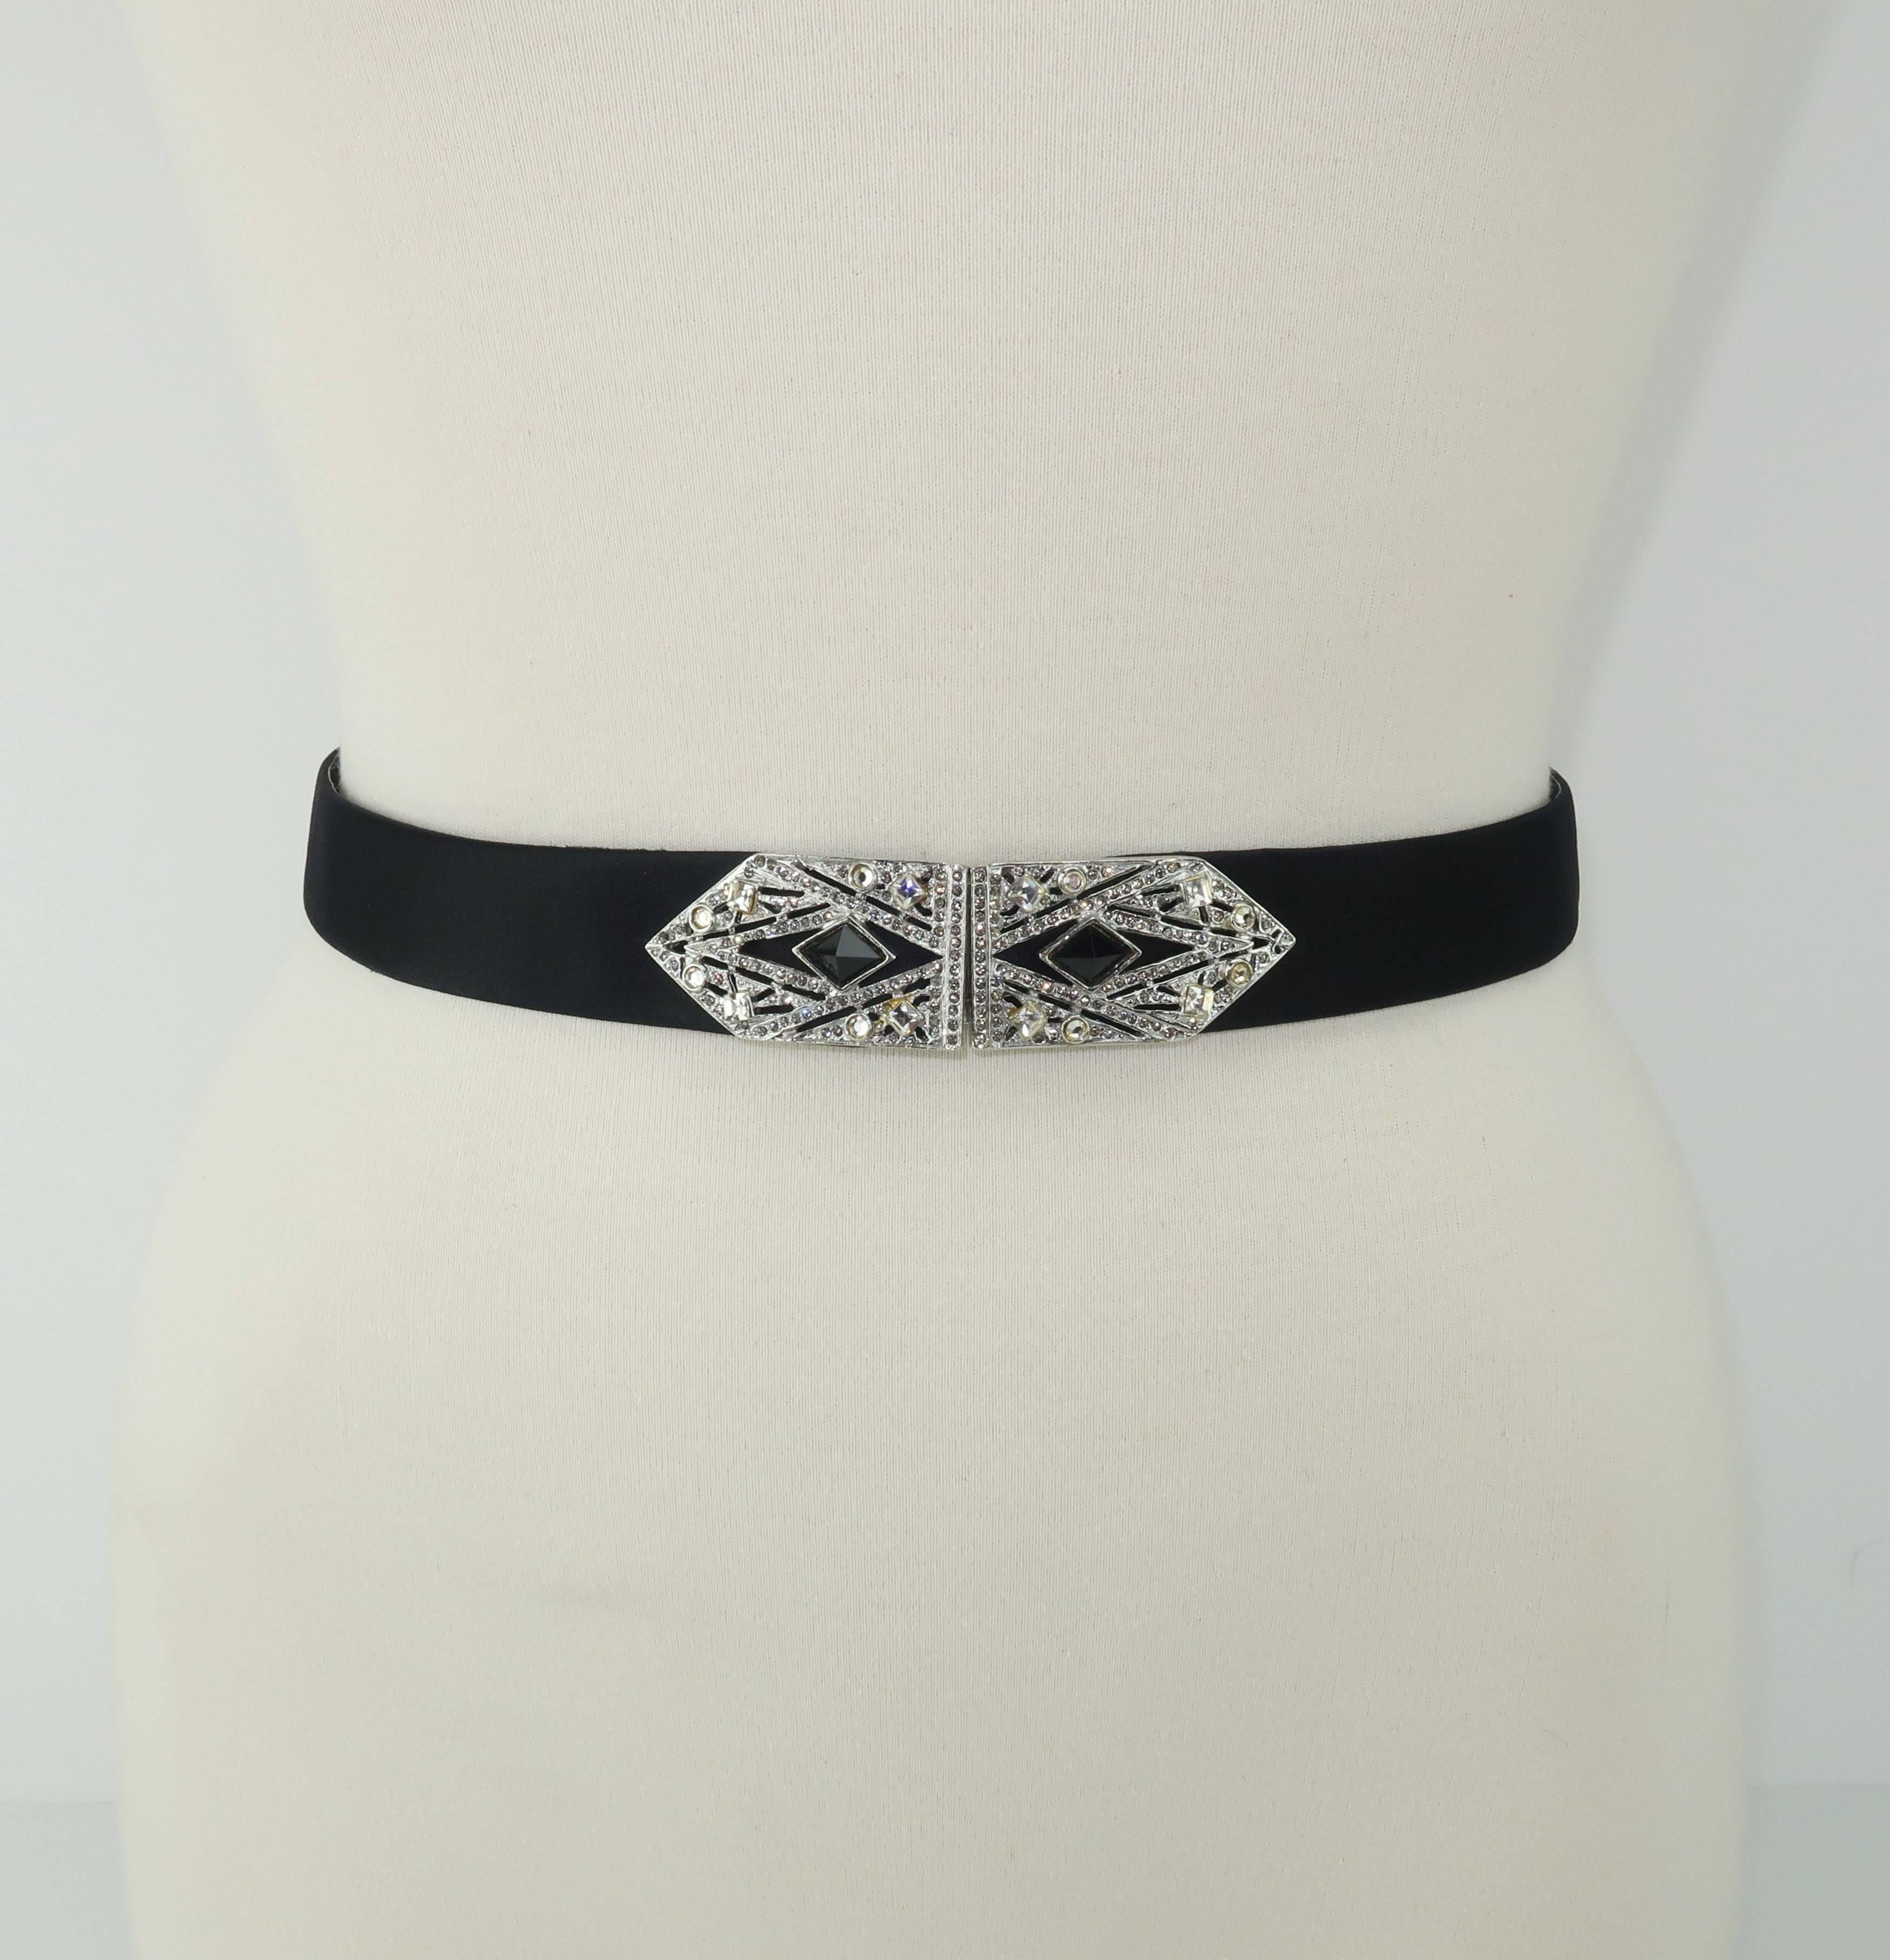 Judith Leiber puts a contemporary spin on a classic art deco design with this rhinestone and black crystal encrusted buckle with black satin belt. The buckle hooks at the front and the belt easily adjusts size with an overlapped slide design.